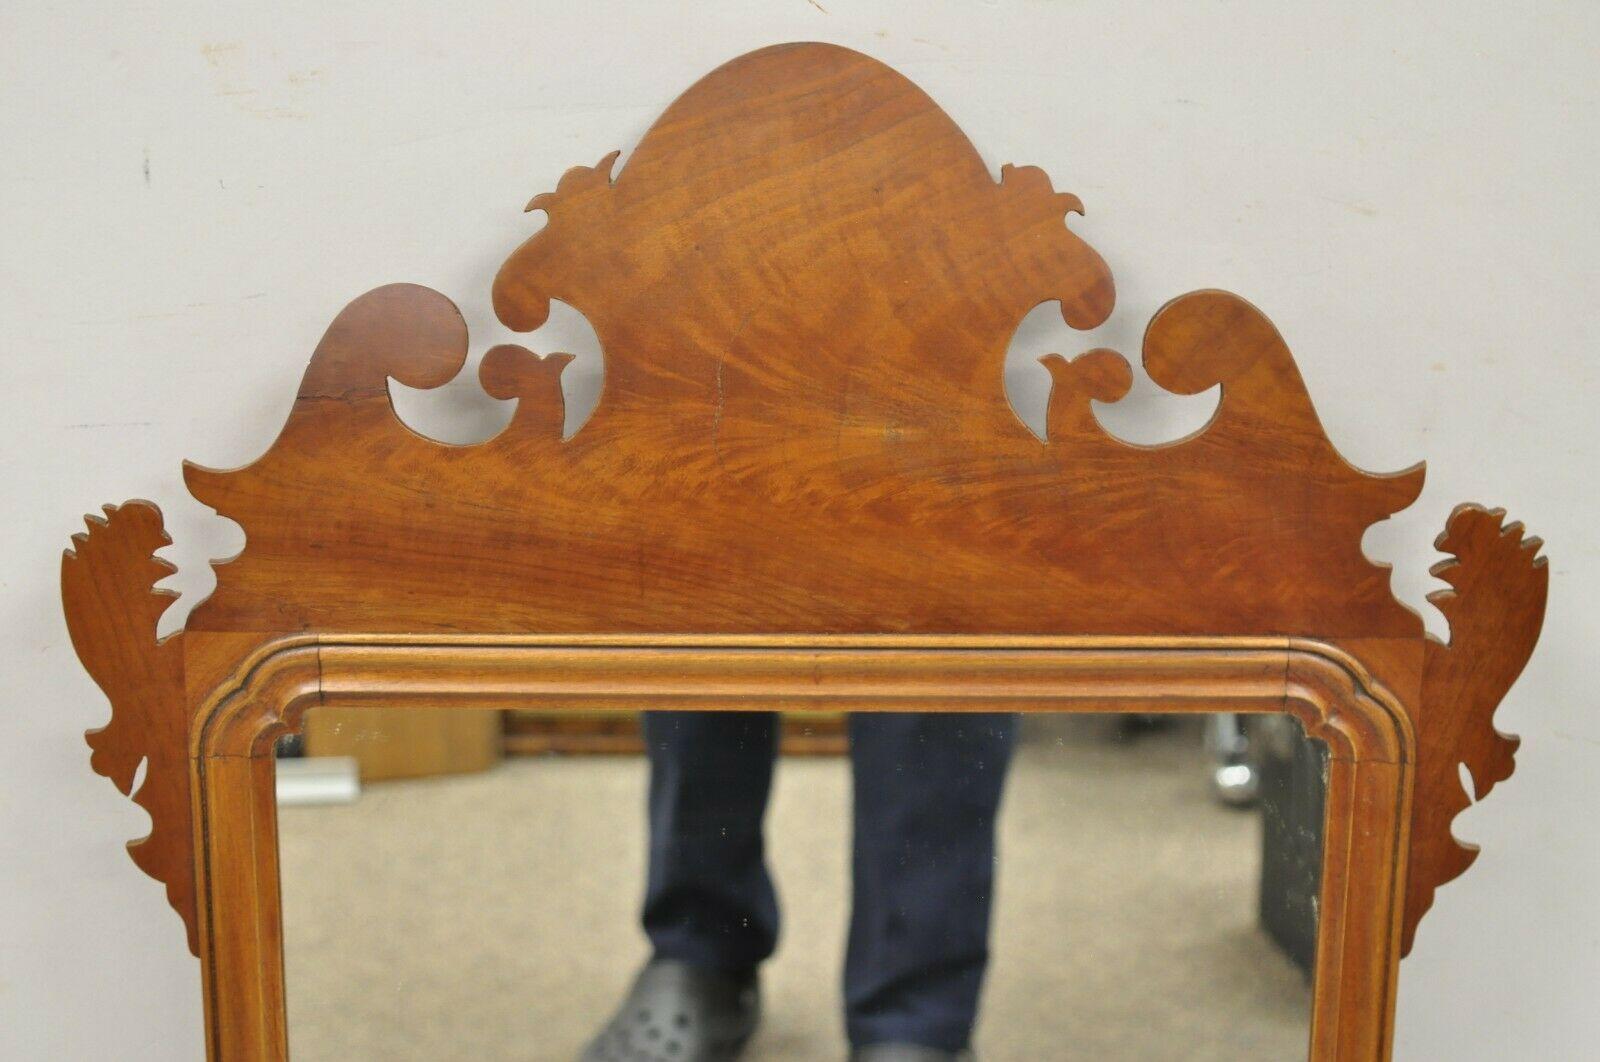 Antique Mahogany Federal Chippendale Crotch Mahogany Broken Arch Mirror. Item features a bowed pediment, crotch mahogany frame, beautiful wood grain, very nice antique item, quality American craftsmanship. Circa Late 19th - Early 20th Century.